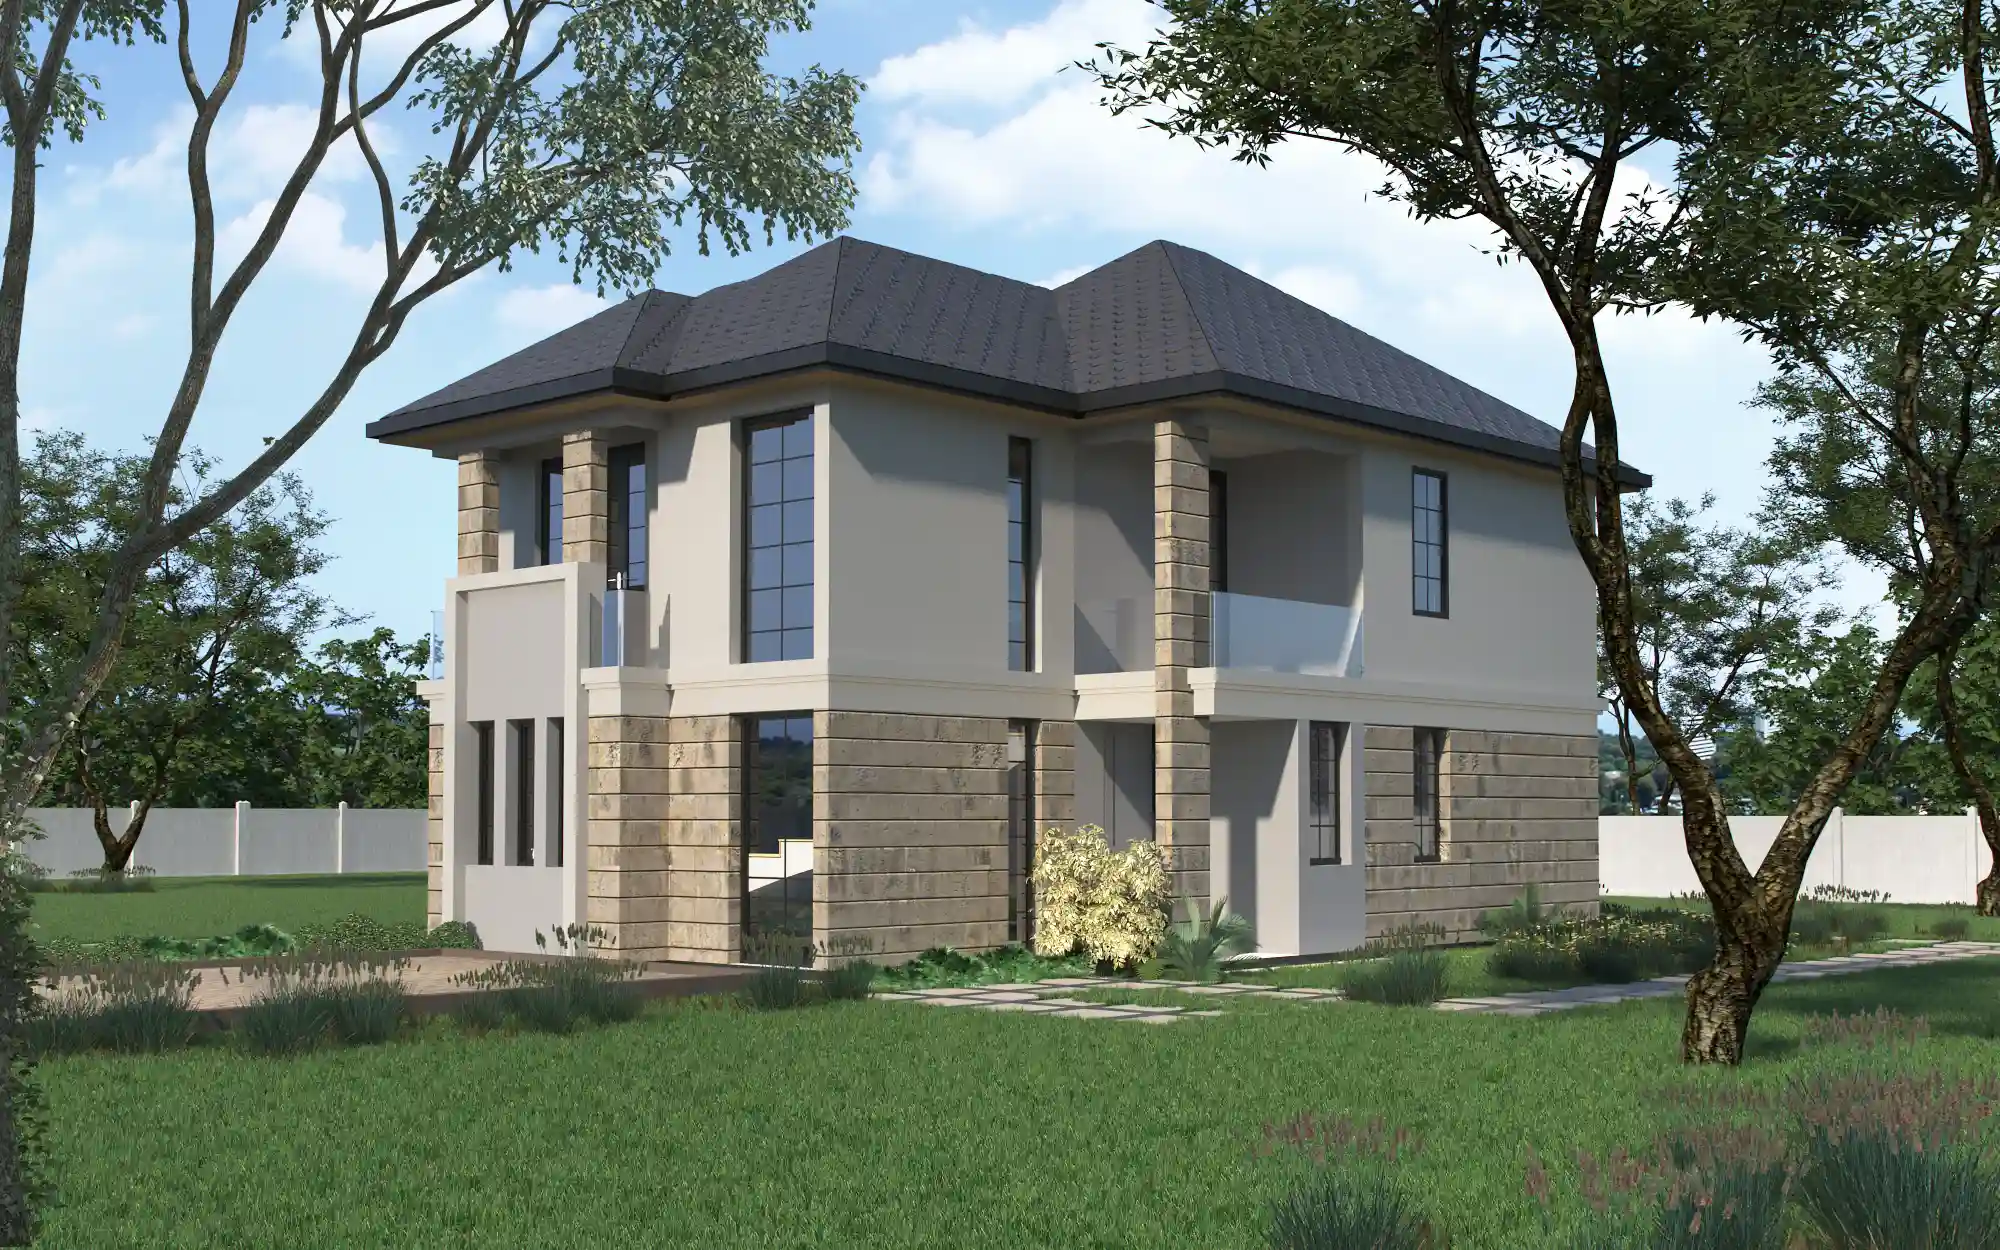 4 Bedroom  Maisonette- ID 42111 - Front Image from Inuua Tujenge house plans with 4 bedrooms and 4 bathrooms. ( maisonette )